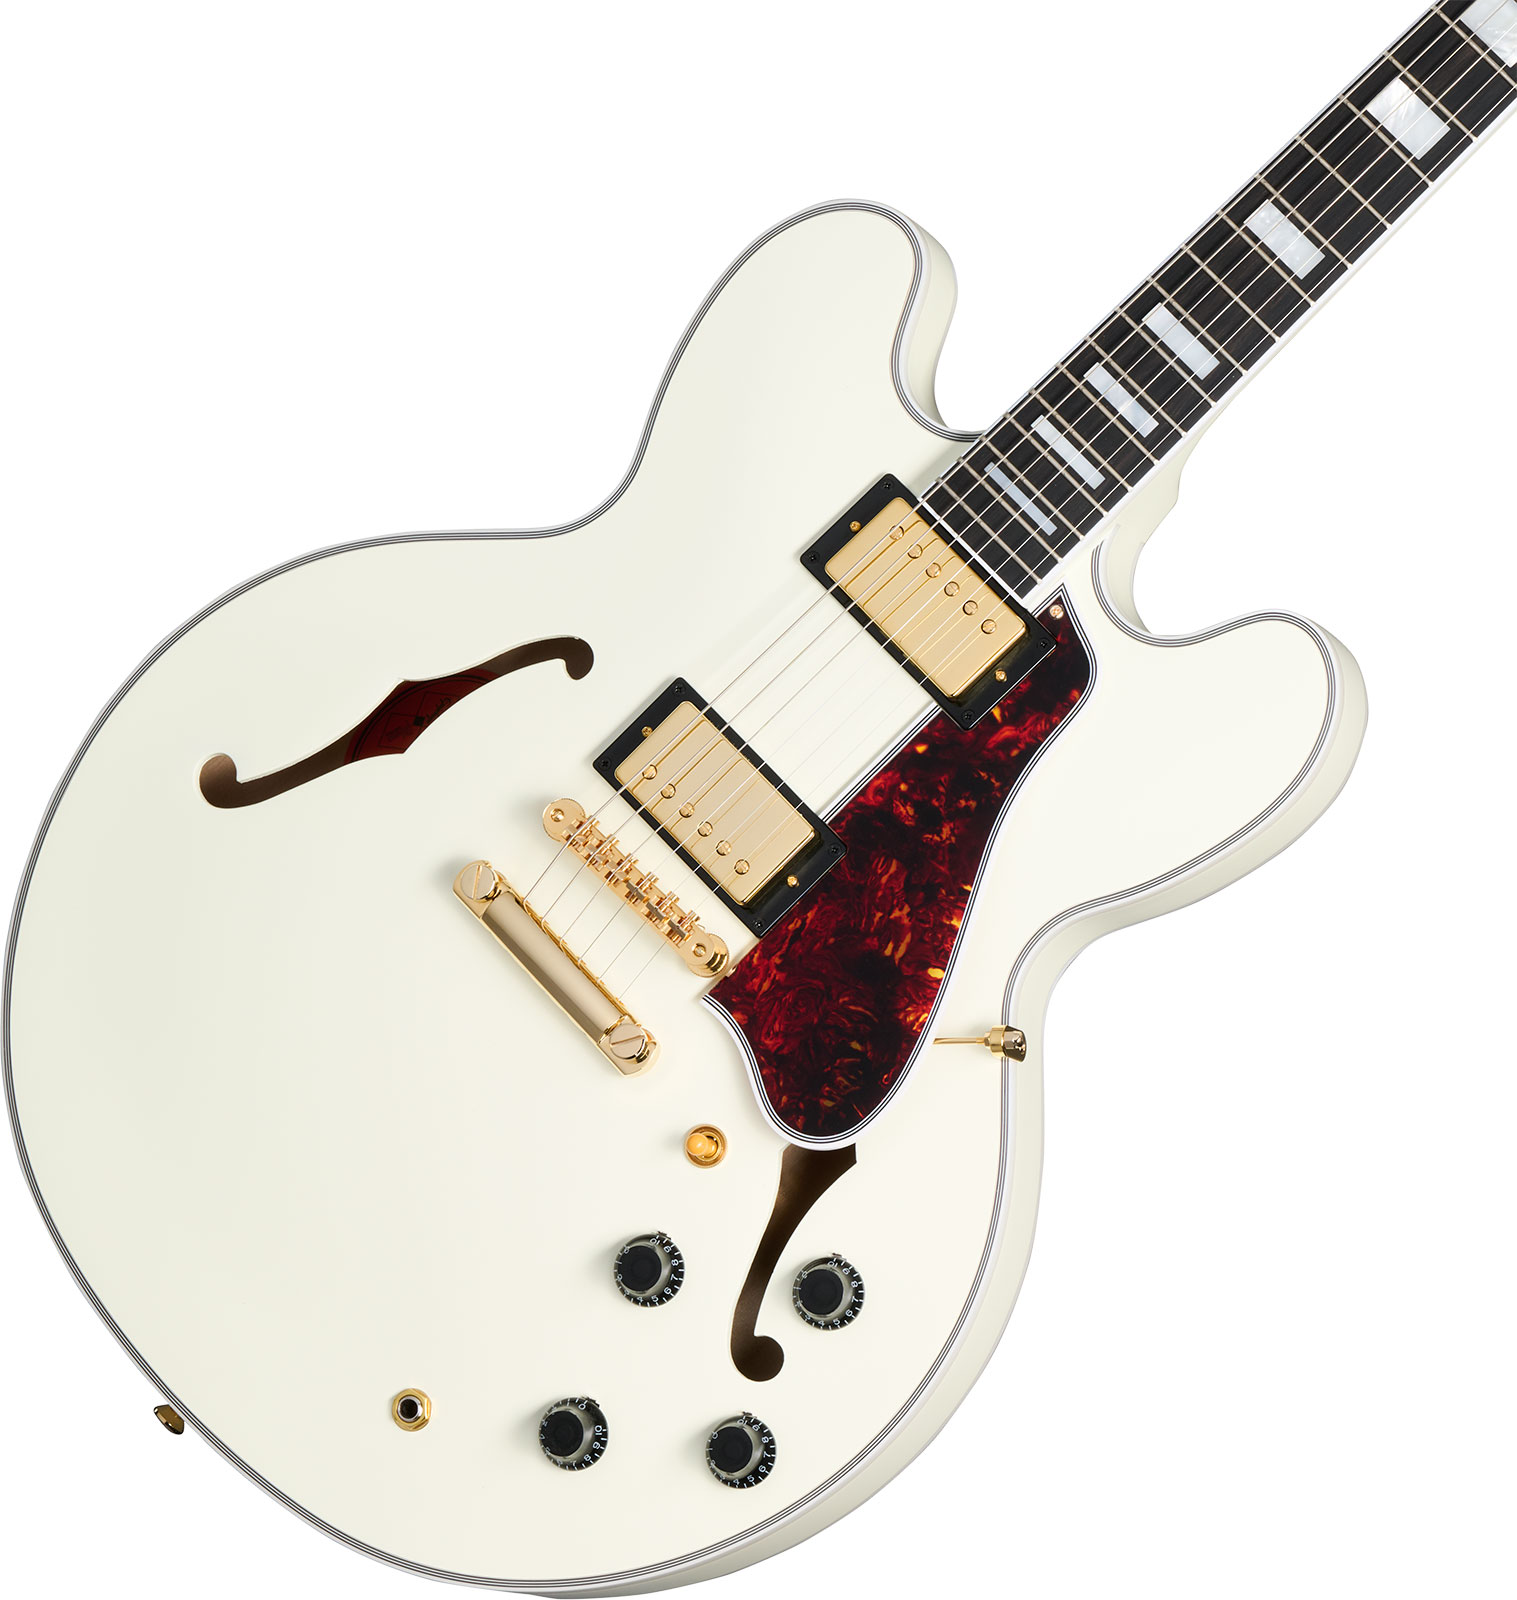 Epiphone Es355 1959 Inspired By 2h Gibson Ht Eb - Vos Classic White - Guitarra eléctrica semi caja - Variation 3